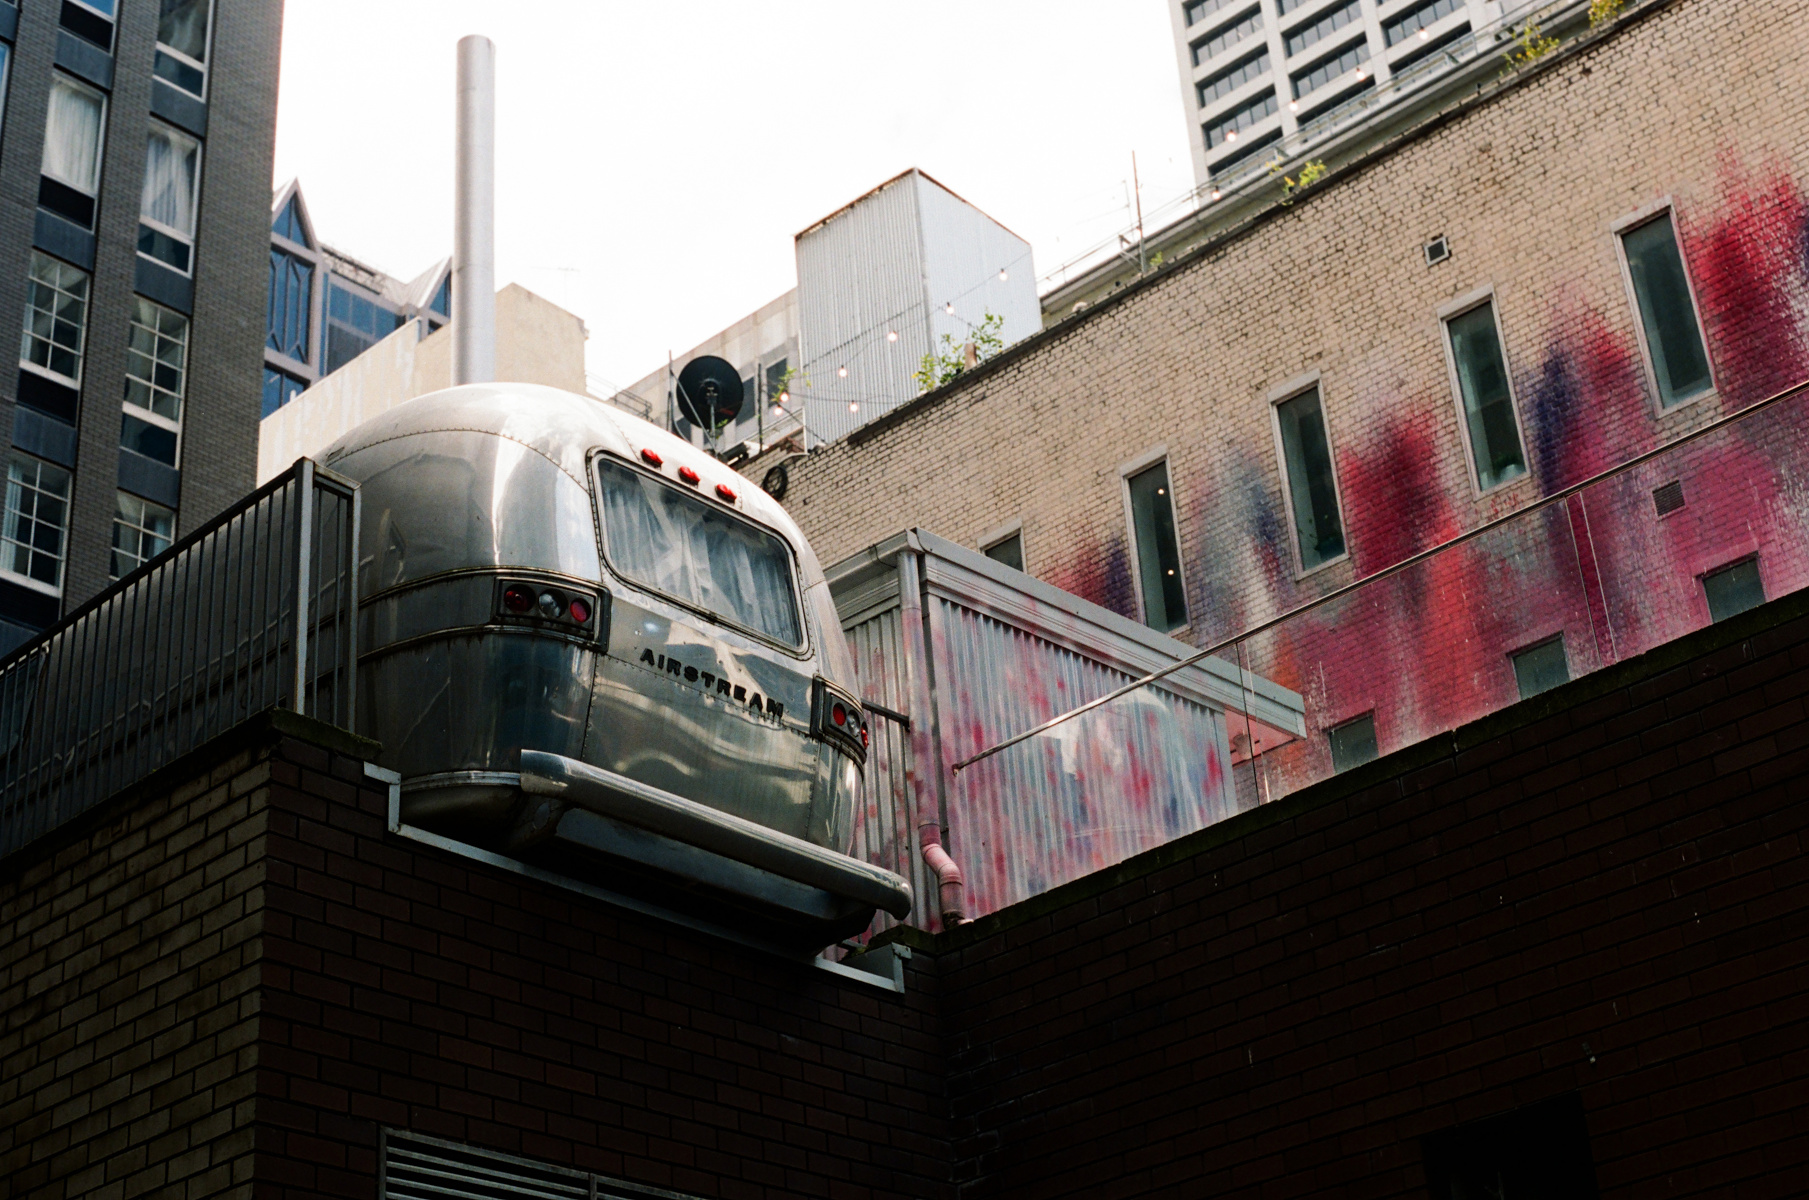 Colour photograph of an Airstream caravan/trailer sitting atop a garage in a city laneway, with paint-splattered walls in the background